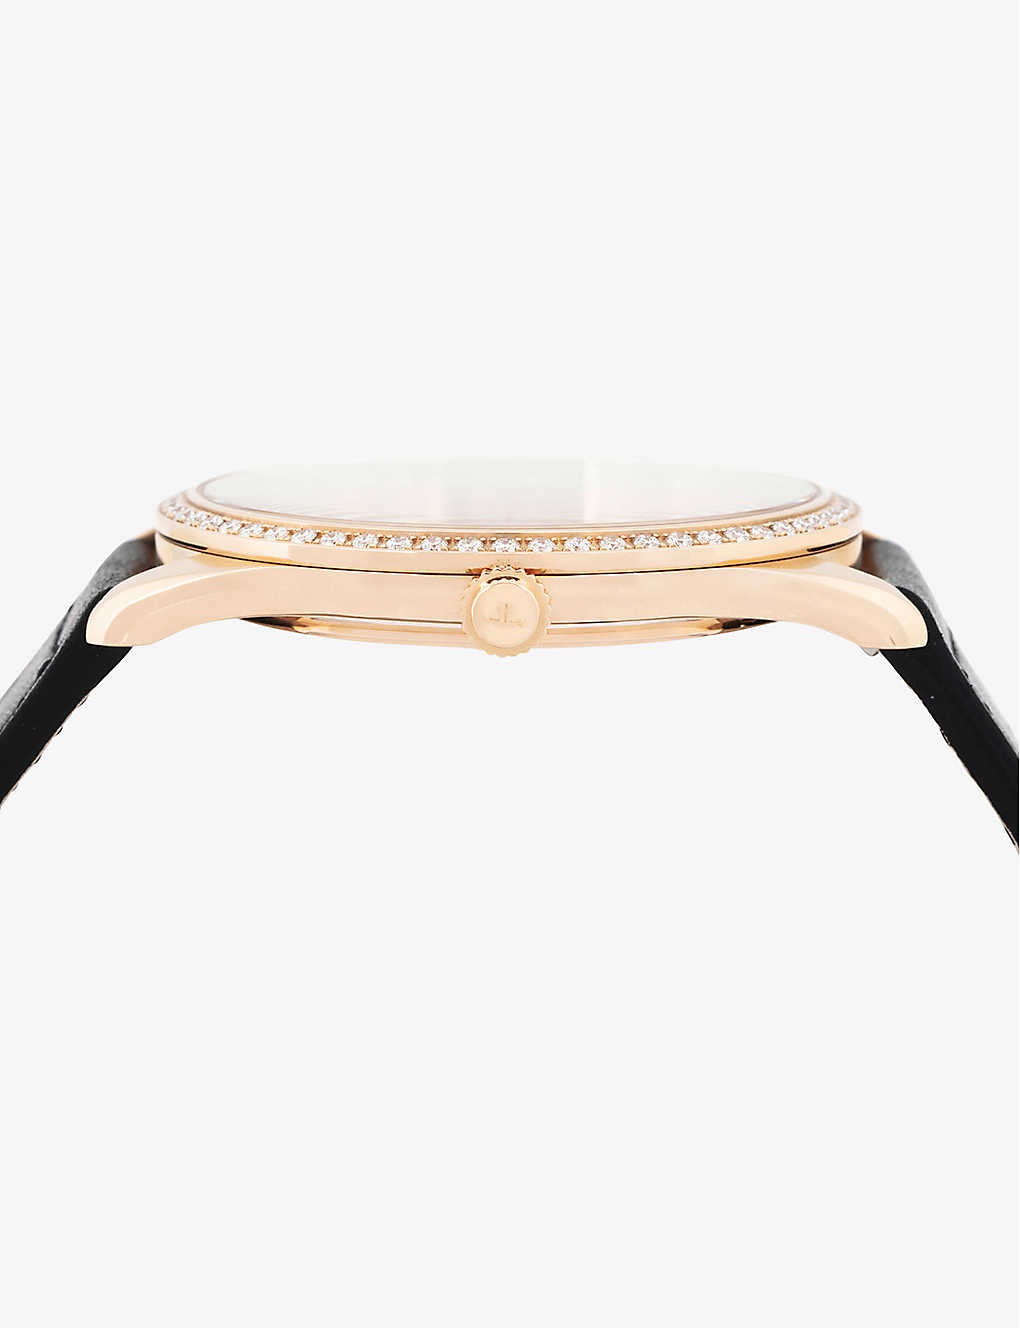 Q1232501 Master Ultra Thin rose-gold, 0.85ct diamond and calfskin-leather watch - 4